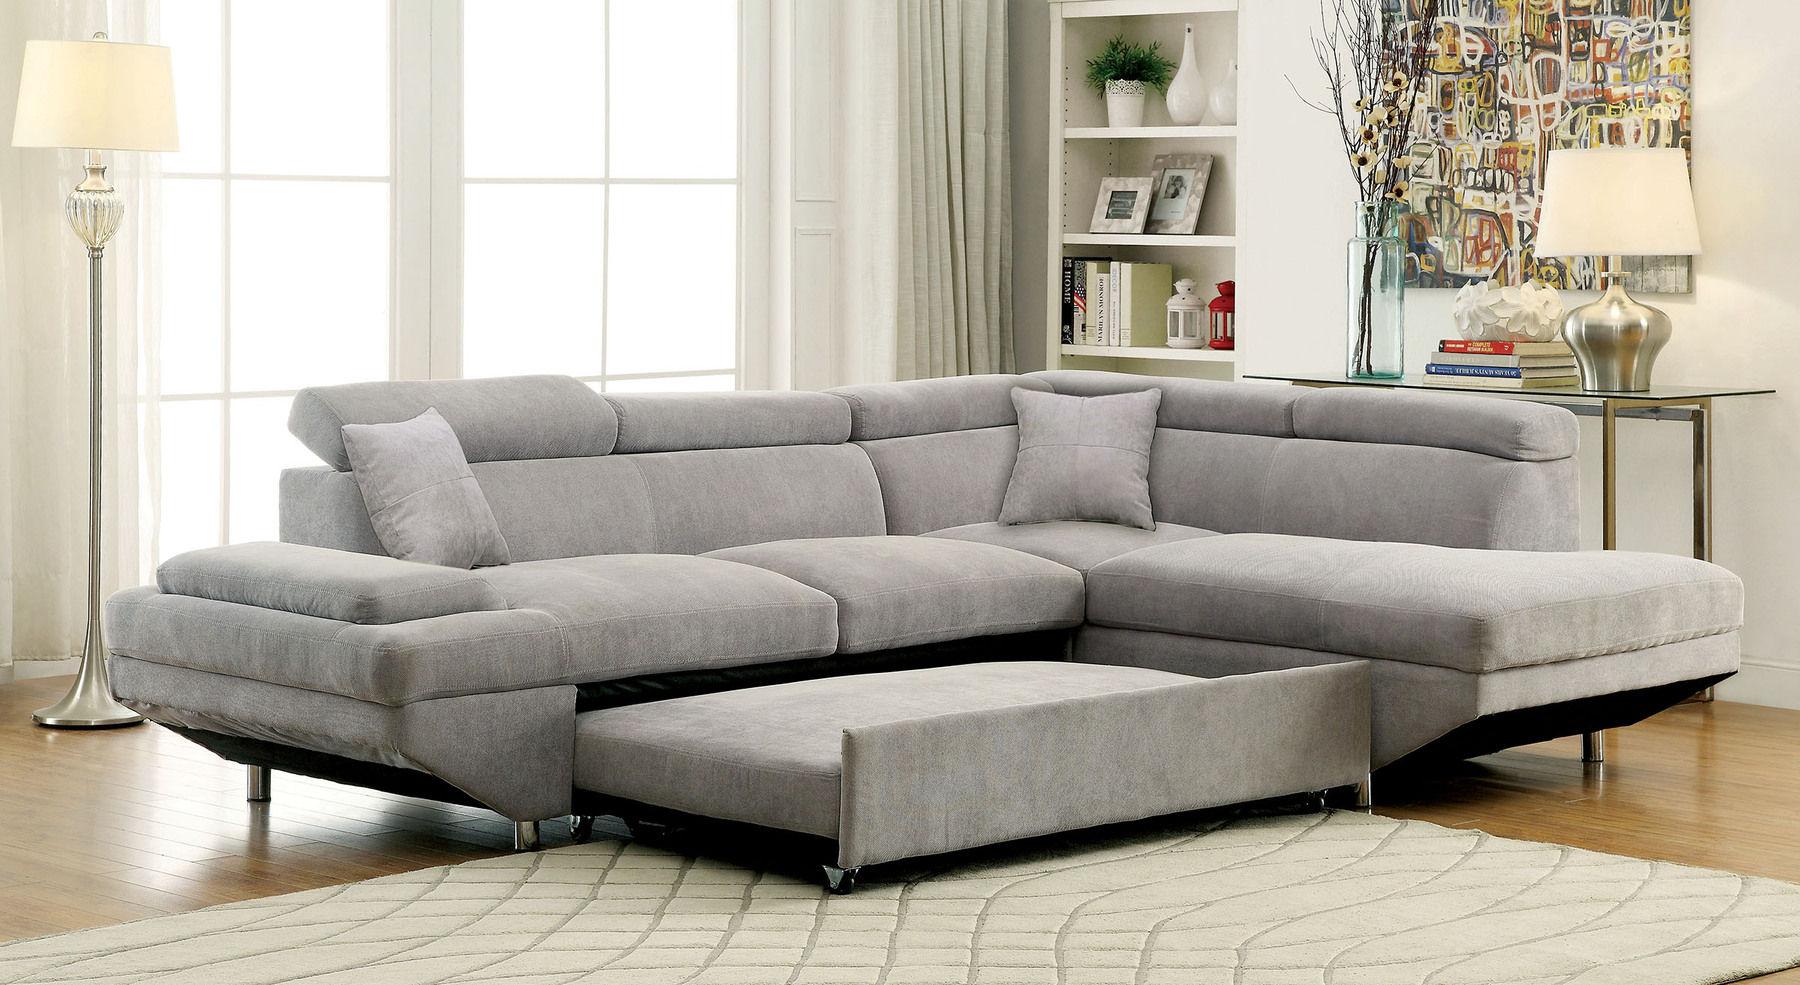 Contemporary Sectional Sofa FOREMAN CM6124GY CM6124GY in Gray 